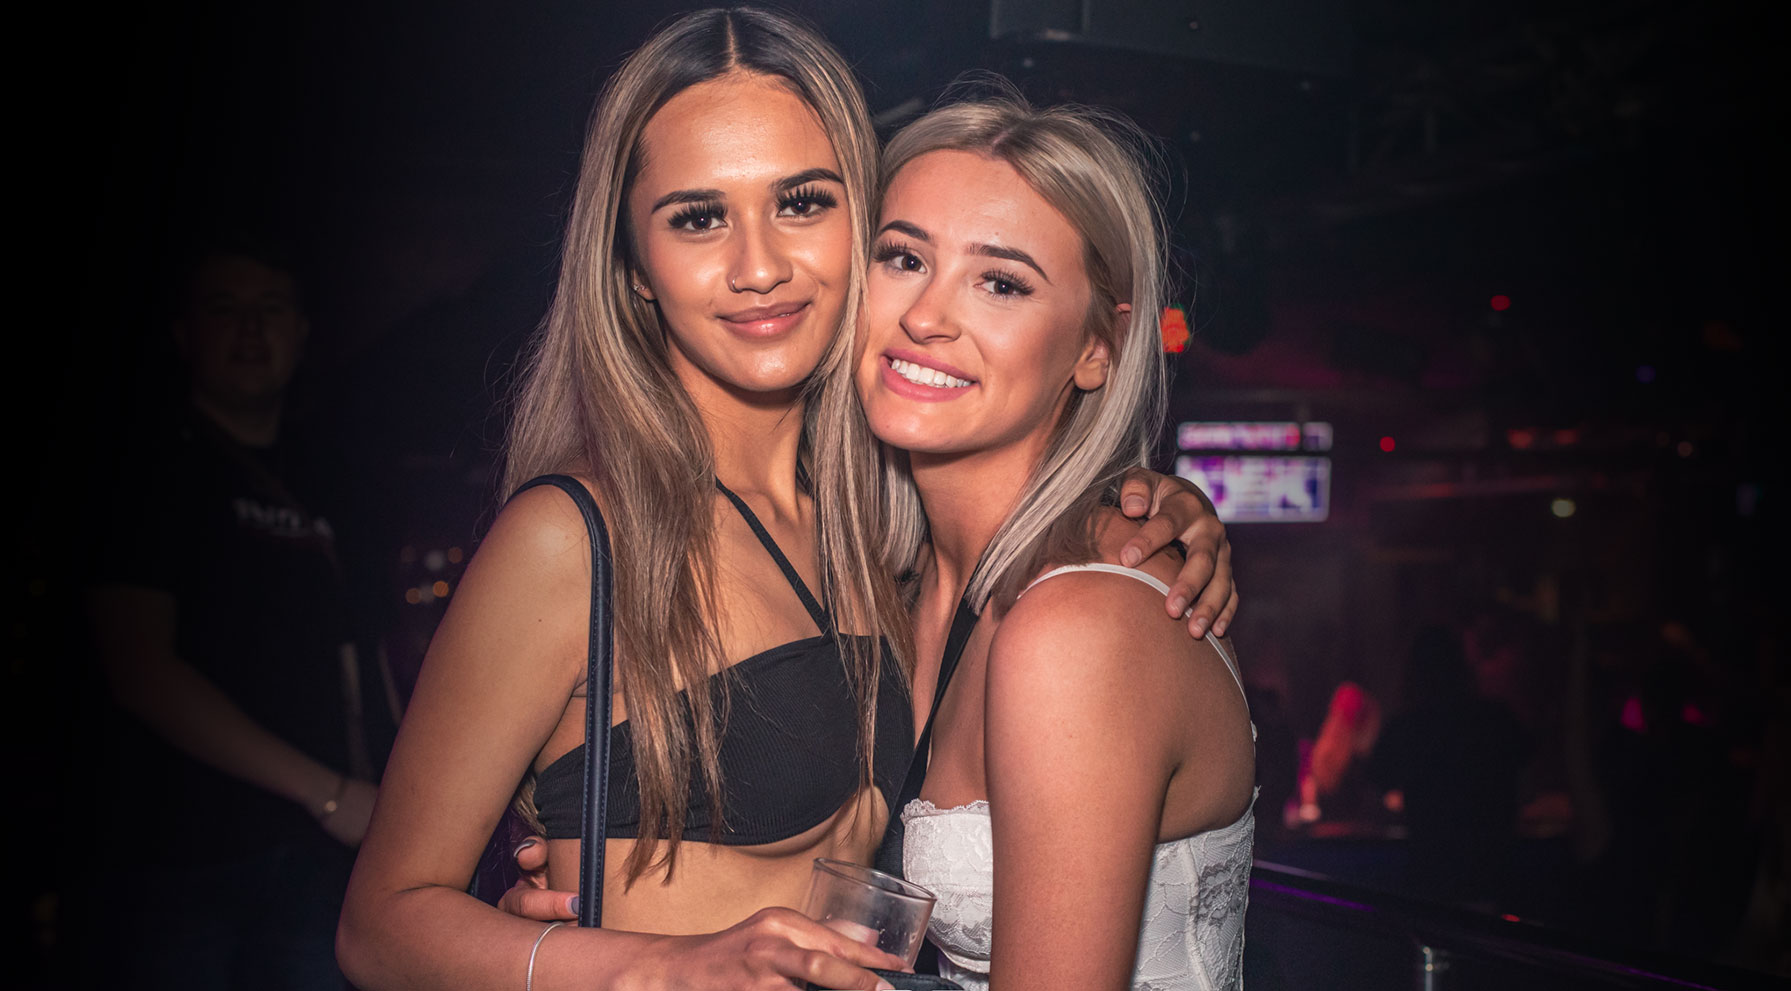 Top Floor nightclub - book a booth, private bar or lounge for that 18th or 21st birthday at Mandurah's only late night venue